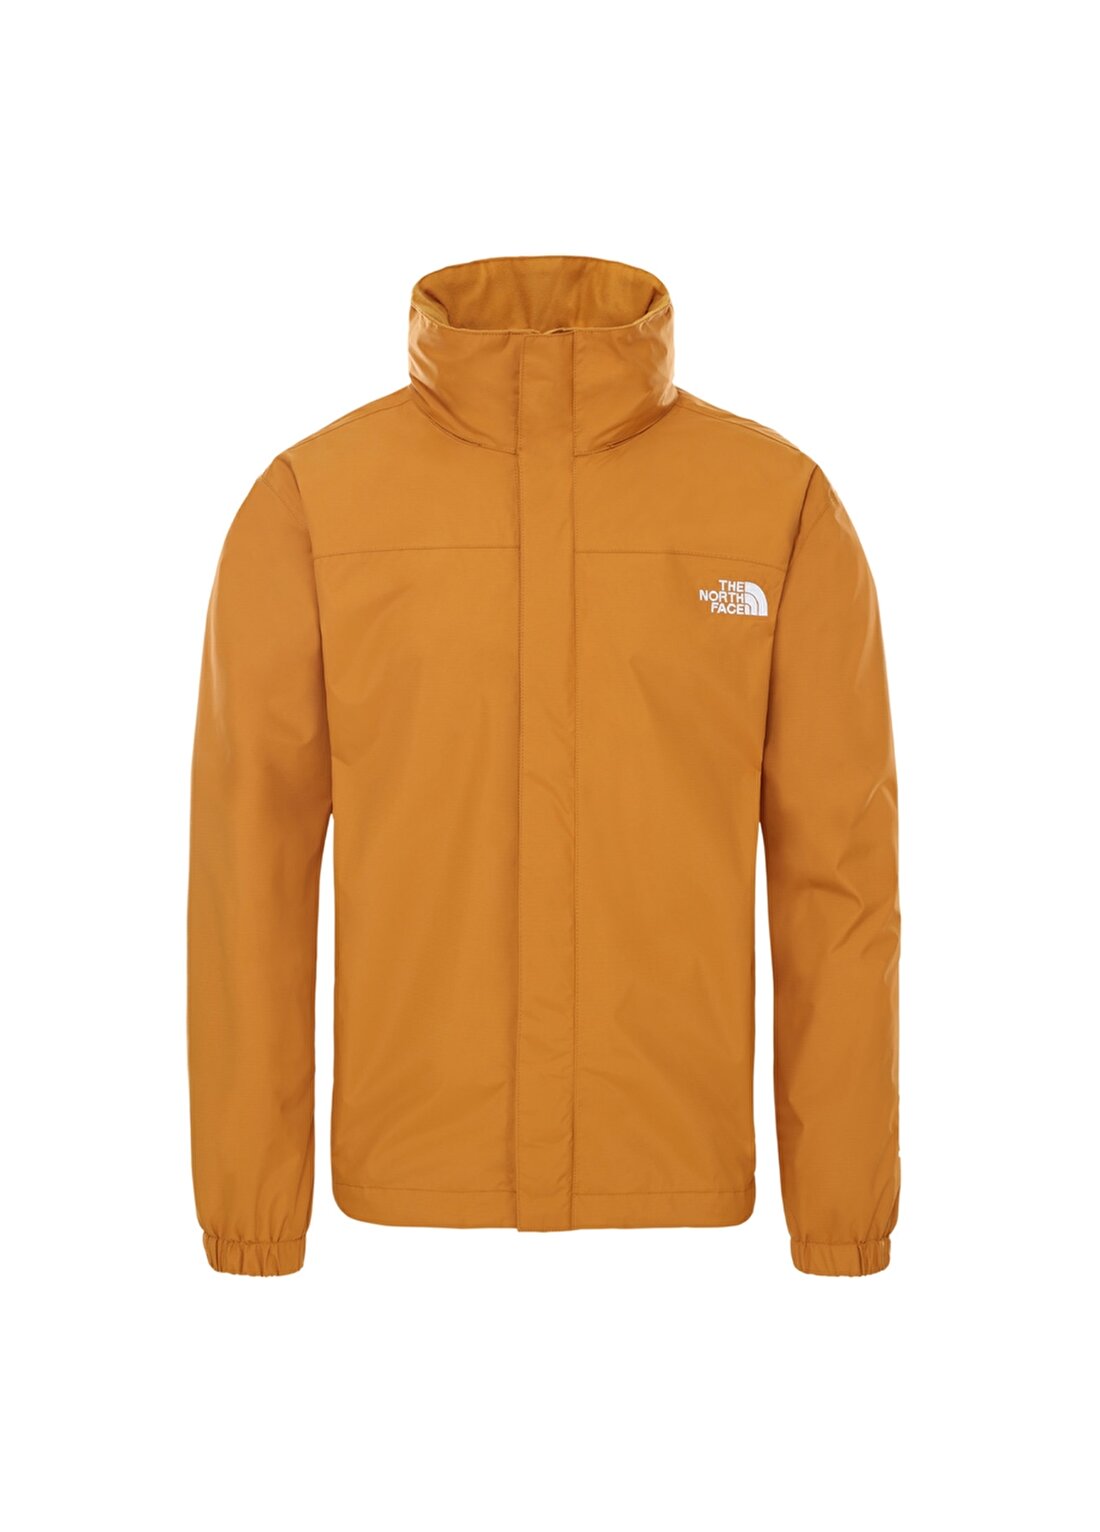 The North Face NF00AR9THBX1 M Resolve Mont